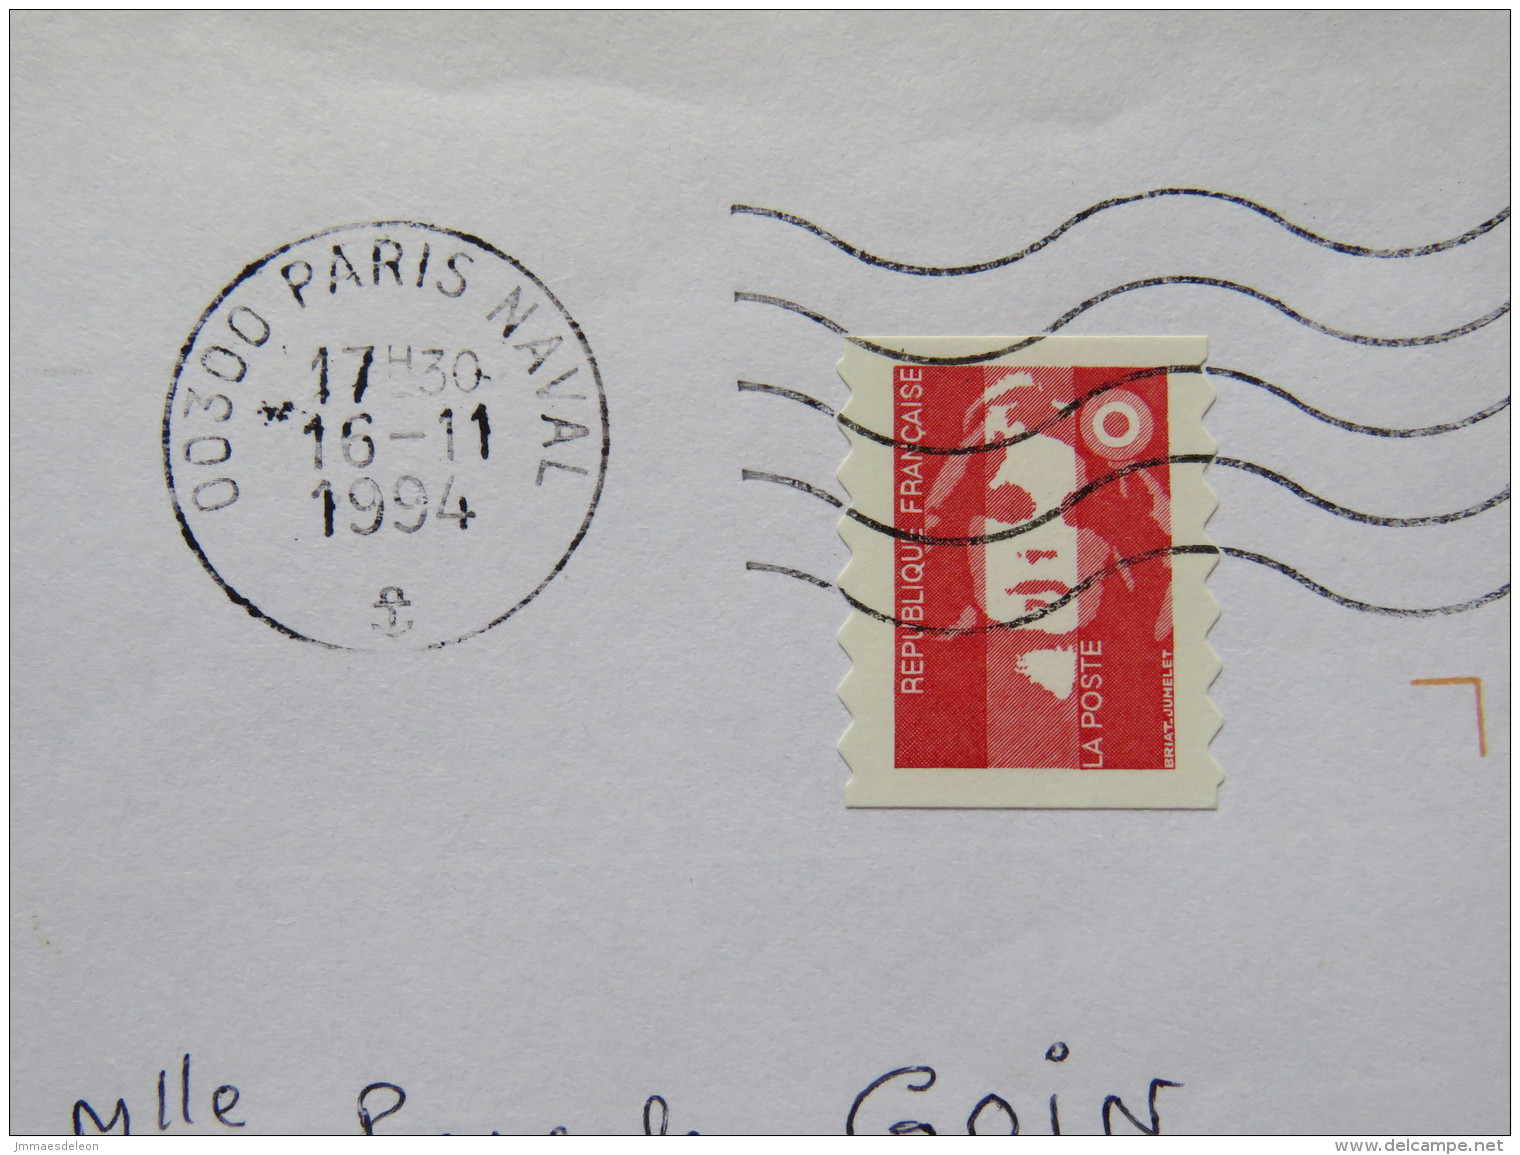 France 1994 Military Cover From Pacific West Mission - Fregate Prairial - Tahiti To France - Sabine - Volcano - Unused Stamps